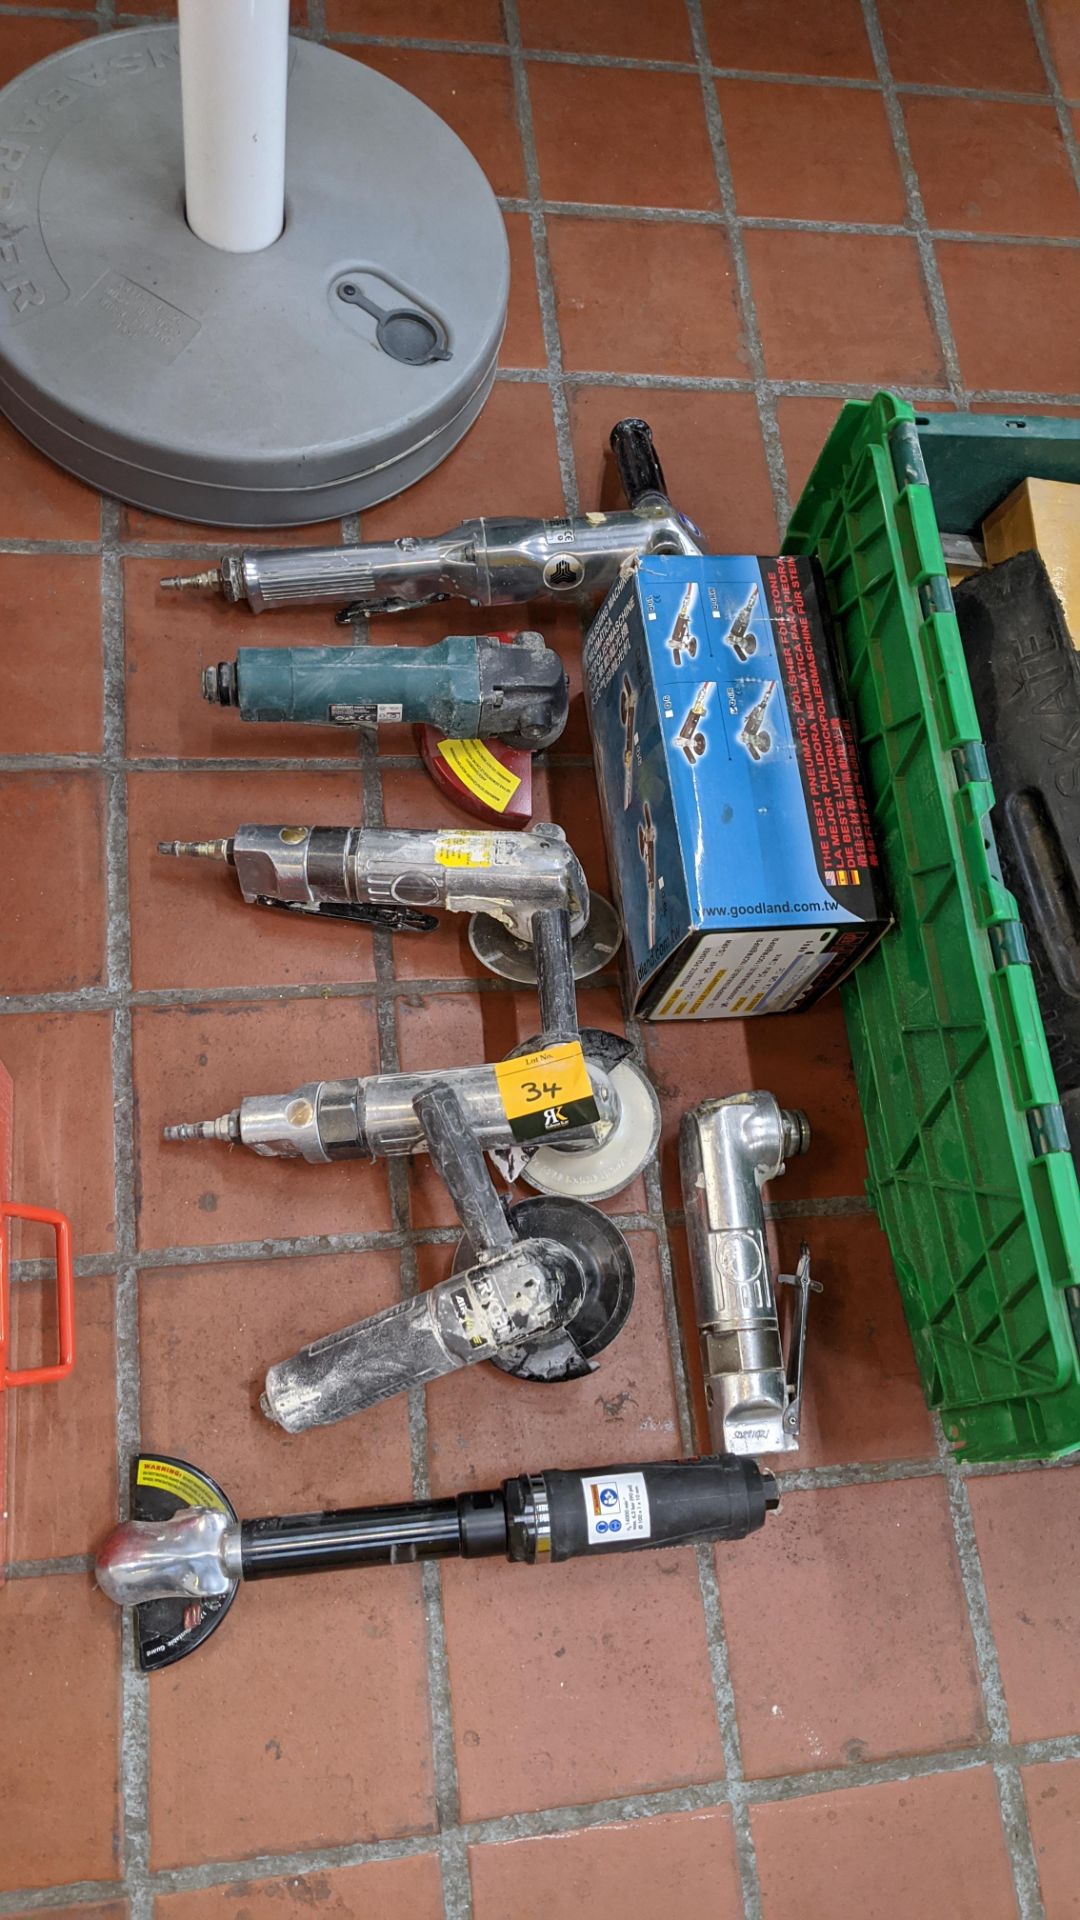 8 off assorted air tools Lots 1 to 39 comprise the total assets from a fibreglass mould manufacturer